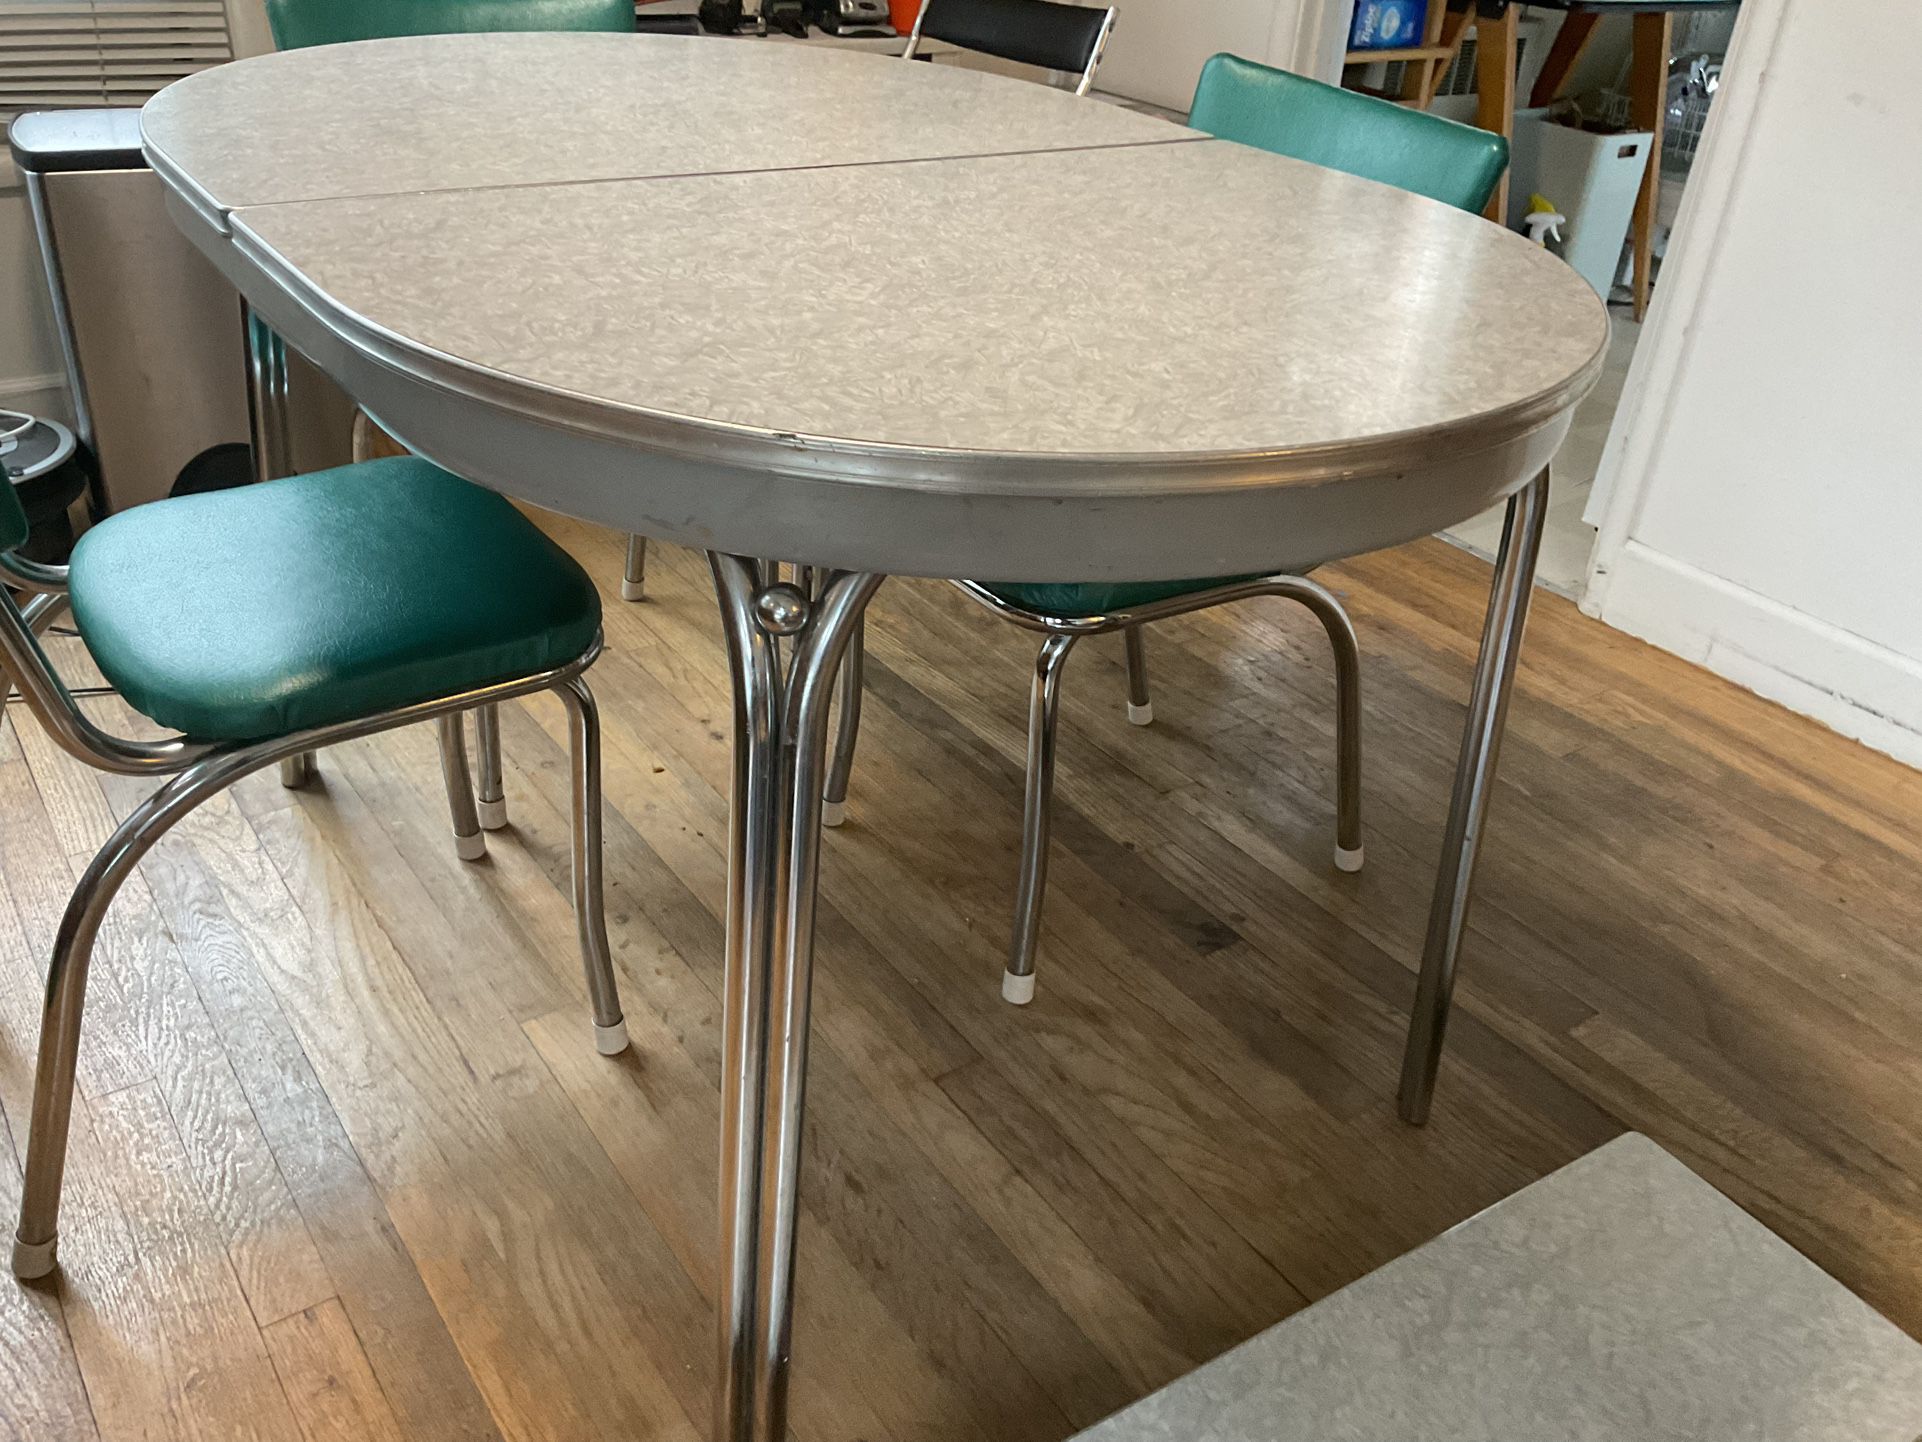 Vintage Oval Formica Kitchen Table, Comes With Leaf (Chair Is Not Included)